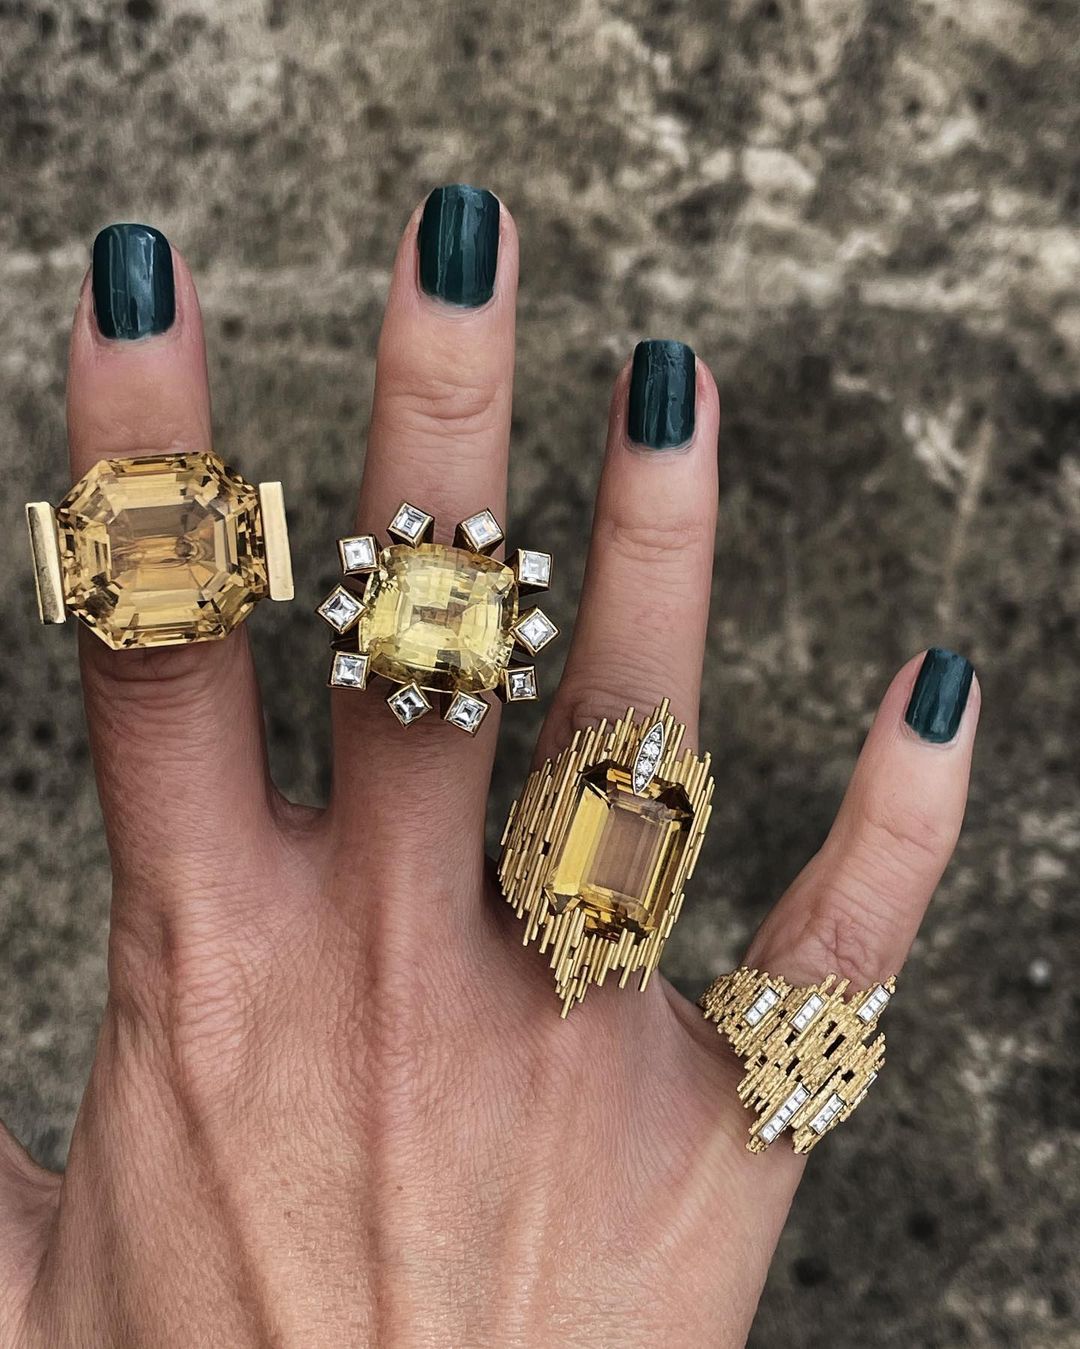 Citrine Ring, Yellow Sapphire Ring, Citrine and Diamond Ring, Yellow Gold and Carre Diamond Ring, All by Andrew Grima. Image: Courtesy of F Grima